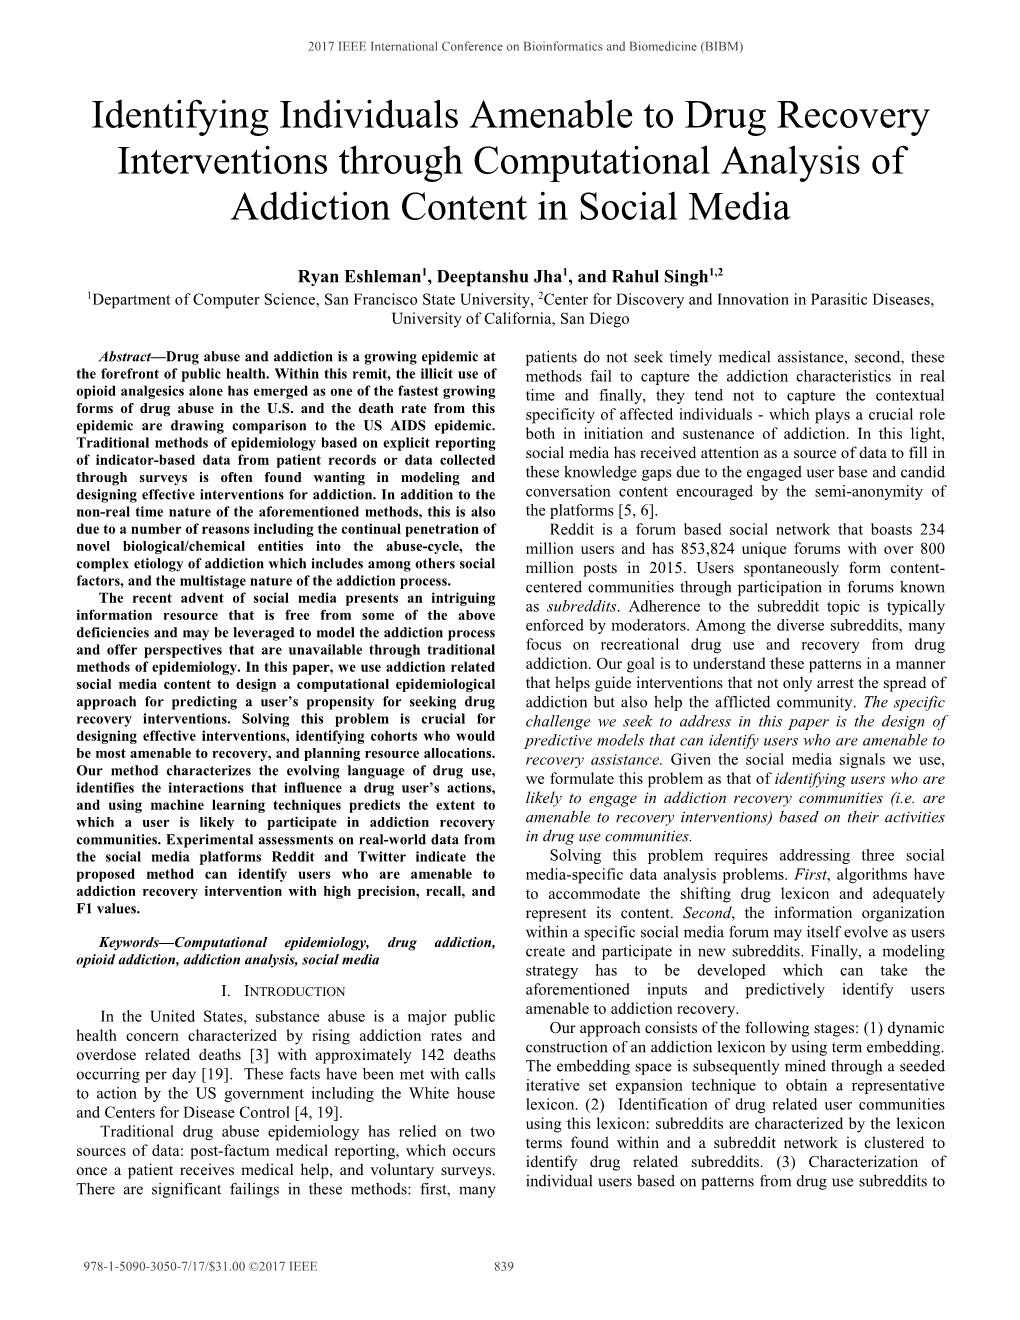 Identifying Individuals Amenable to Drug Recovery Interventions Through Computational Analysis of Addiction Content in Social Media